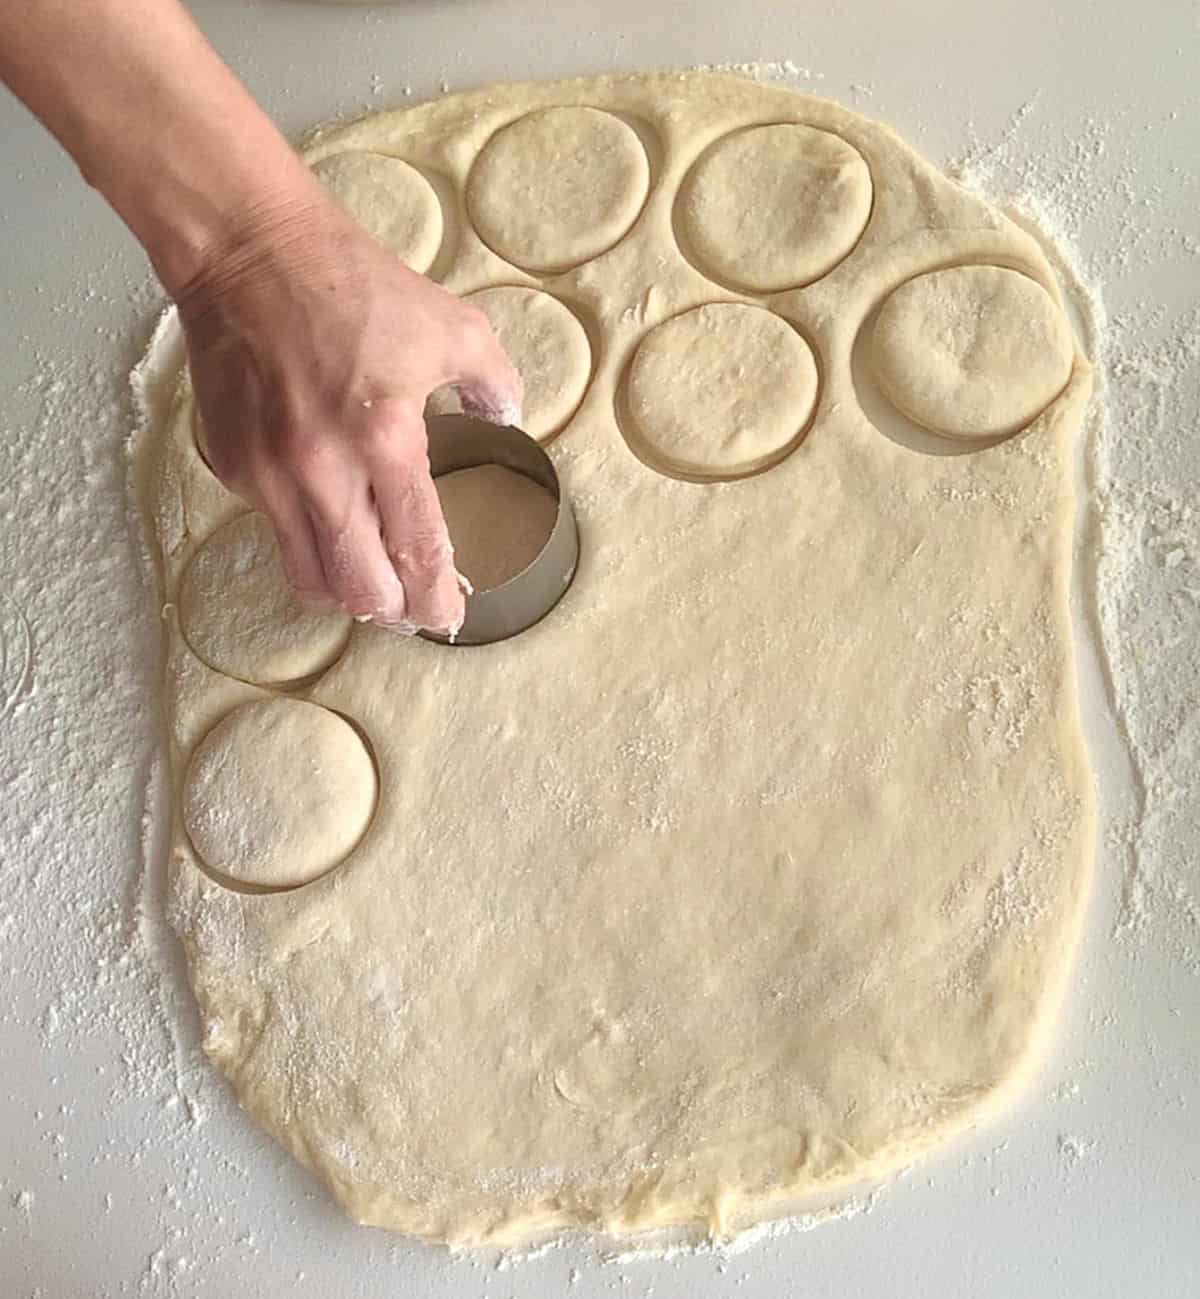 Cutting rounds from rolled dough on a white floured surface